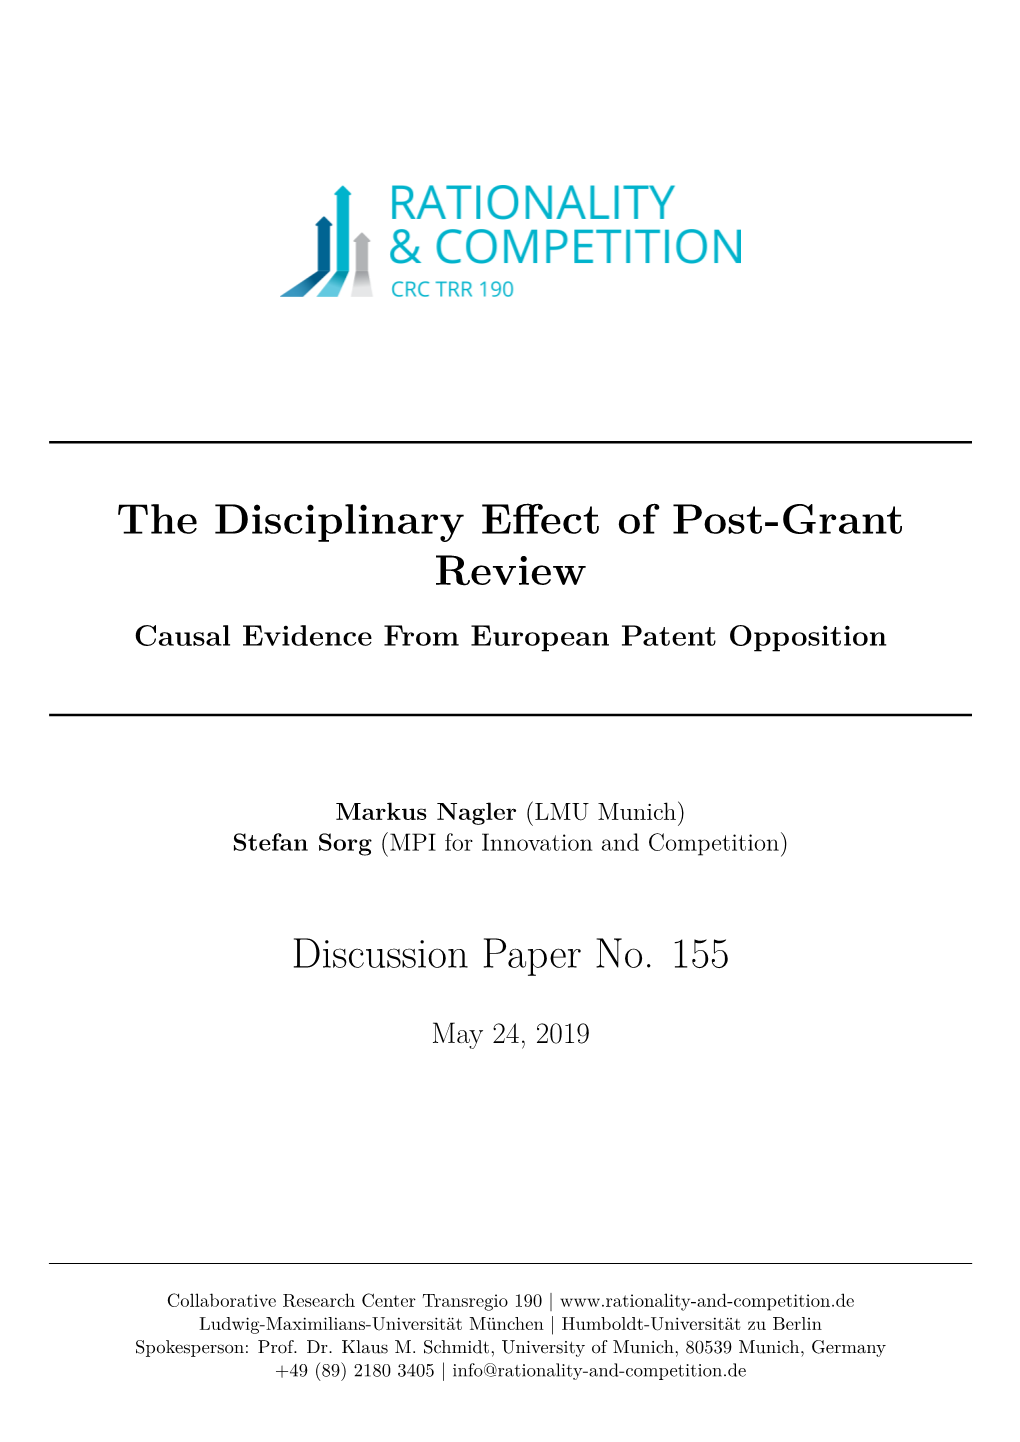 The Disciplinary Effect of Post-Grant Review – Causal Evidence from European Patent Opposition